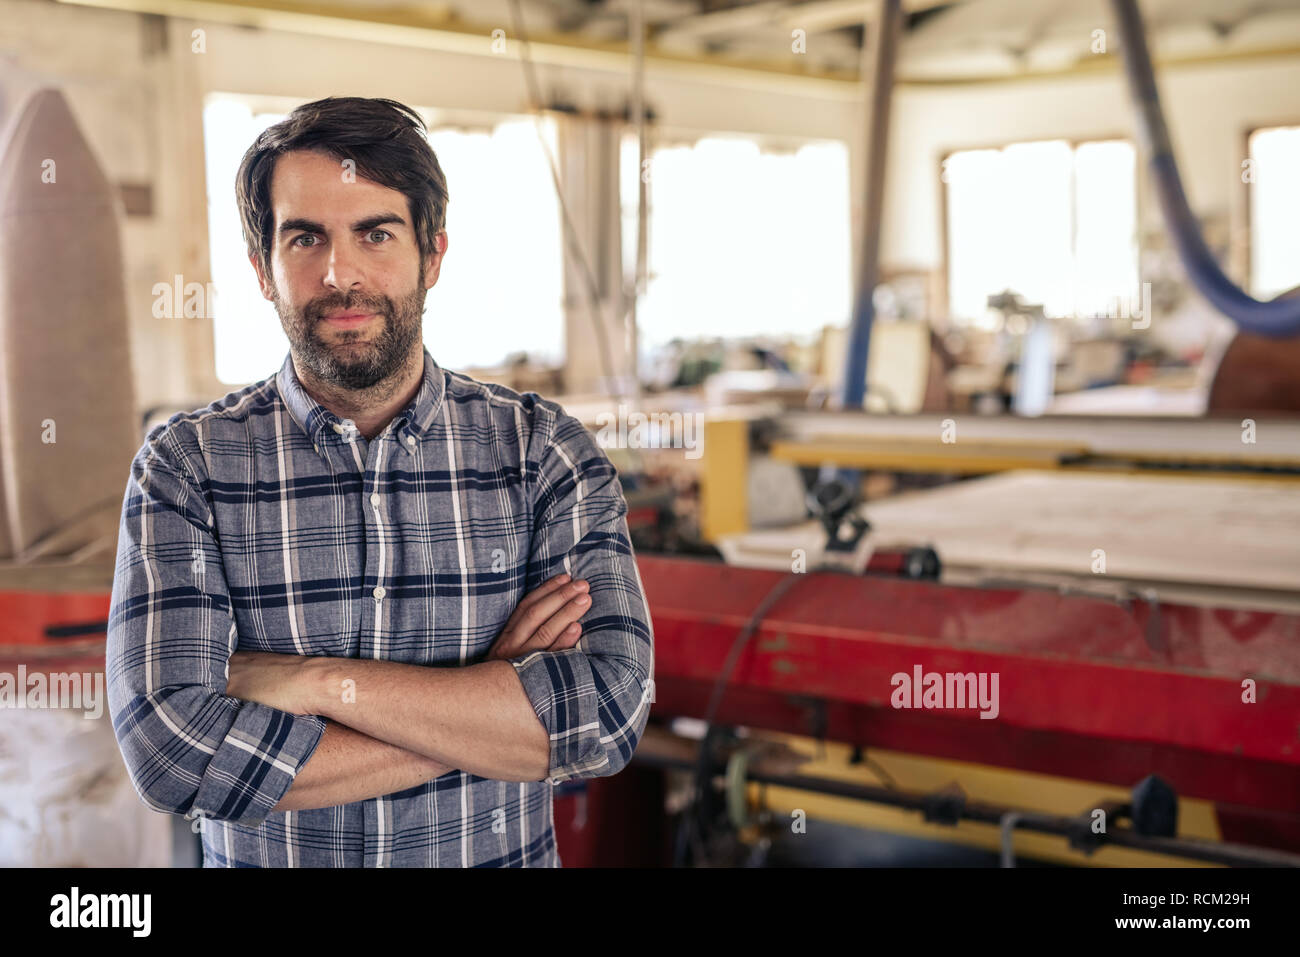 Carpenter standing with his arms crossed in woodworking shop Stock Photo